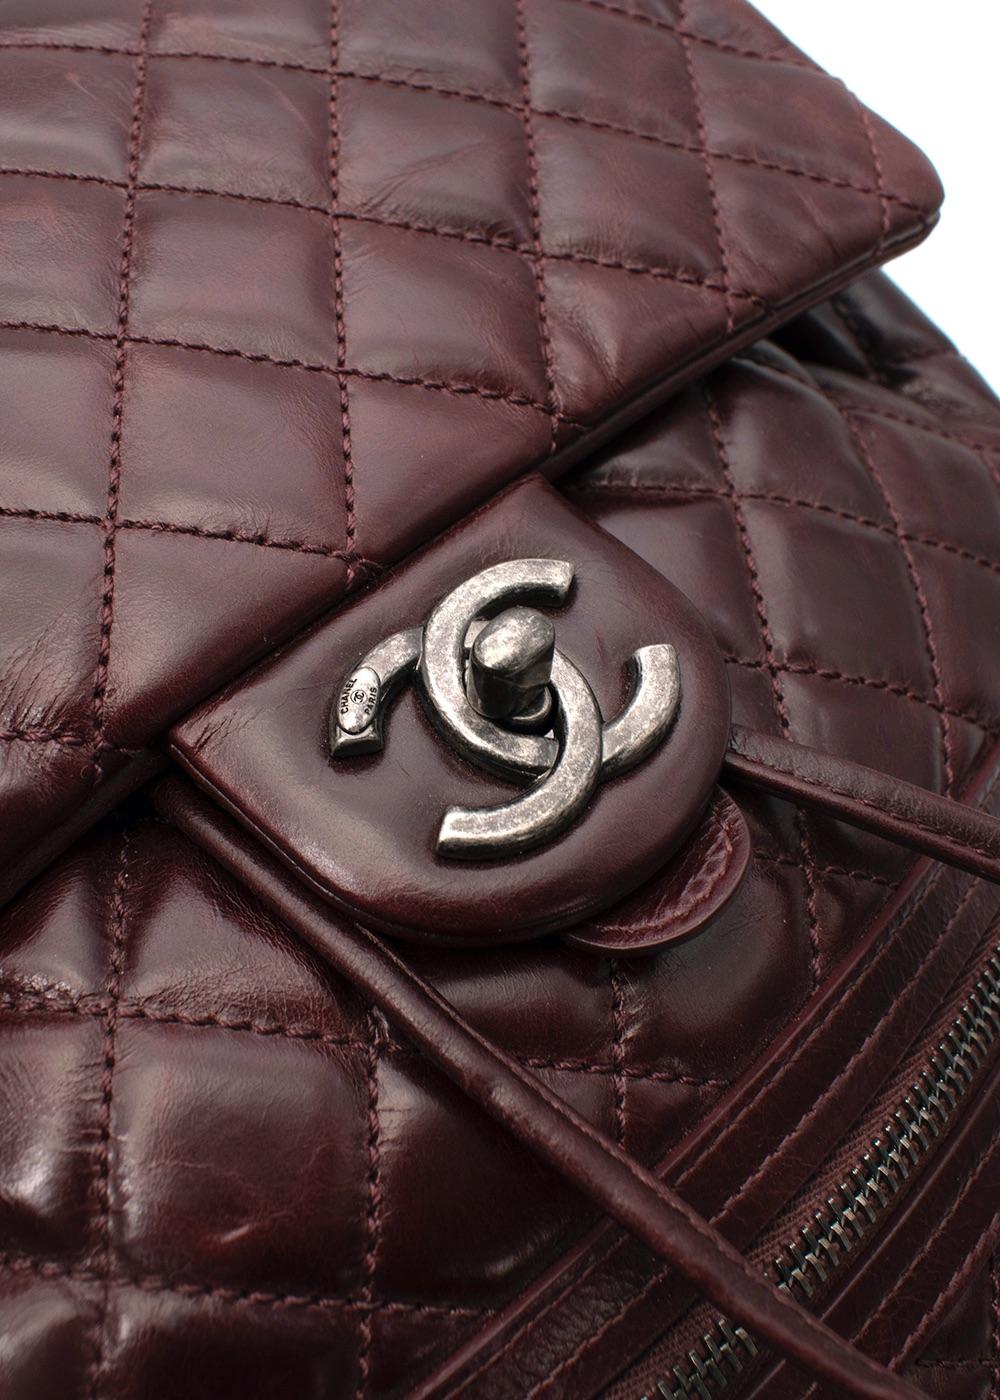 Chanel Burgundy Quilted Leather Urban Spirit Backpack

- Fall 2015 collection 
- Signature diamond-quilted exterior
- Shiny calfskin leather 
- Front zip pocket and dangling CC zipper closure
- Flap top with the classic CC turn-lock and a cinch